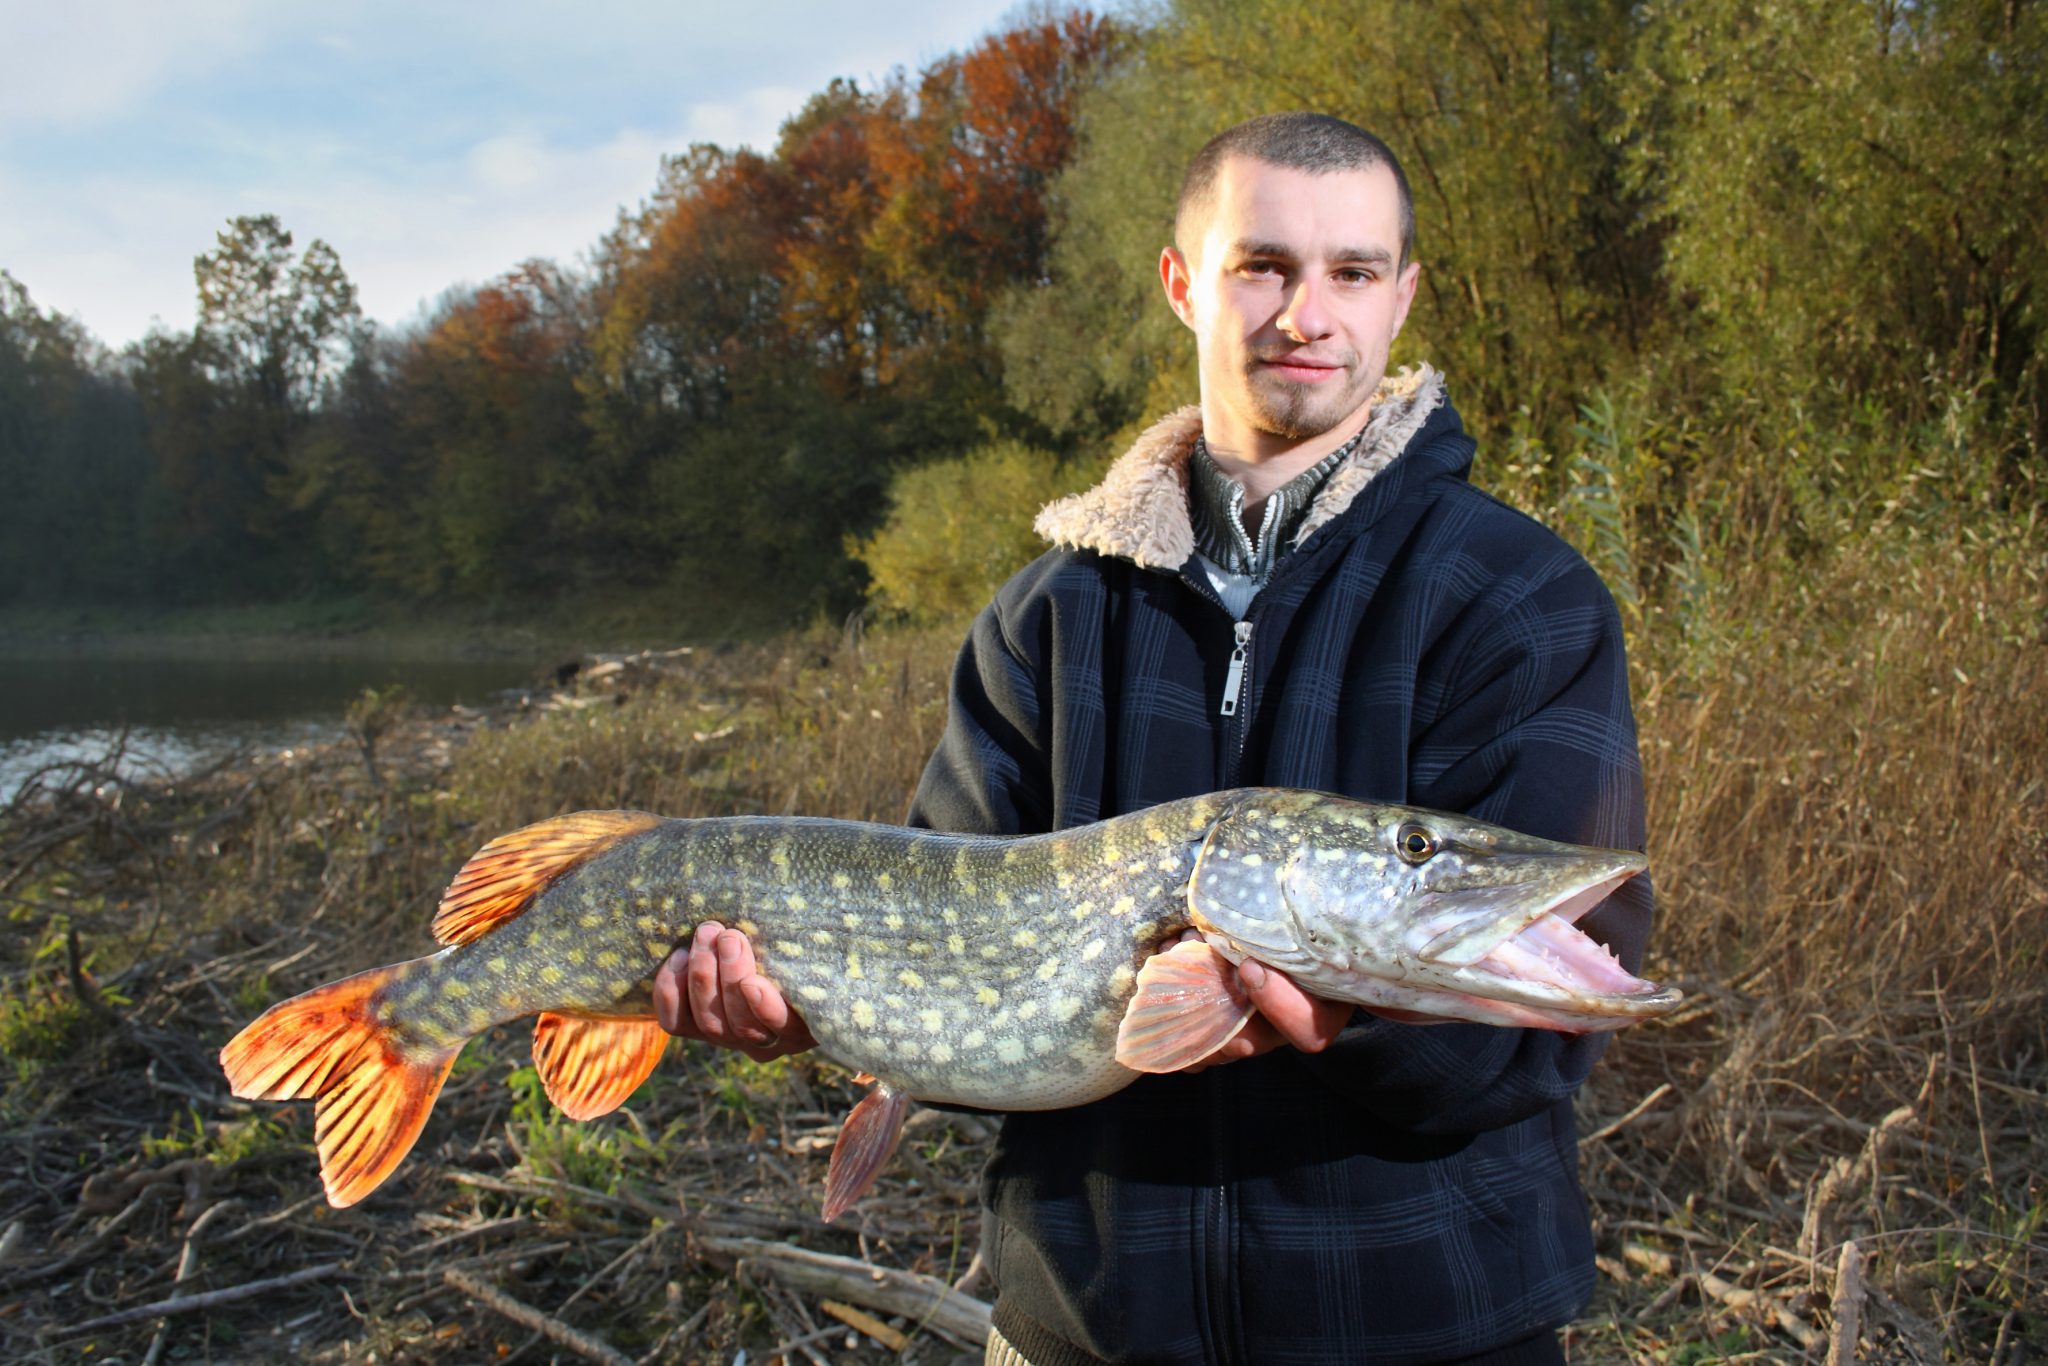 Fishing Musky - The Largest of the Pike Family and Difficult to Catch